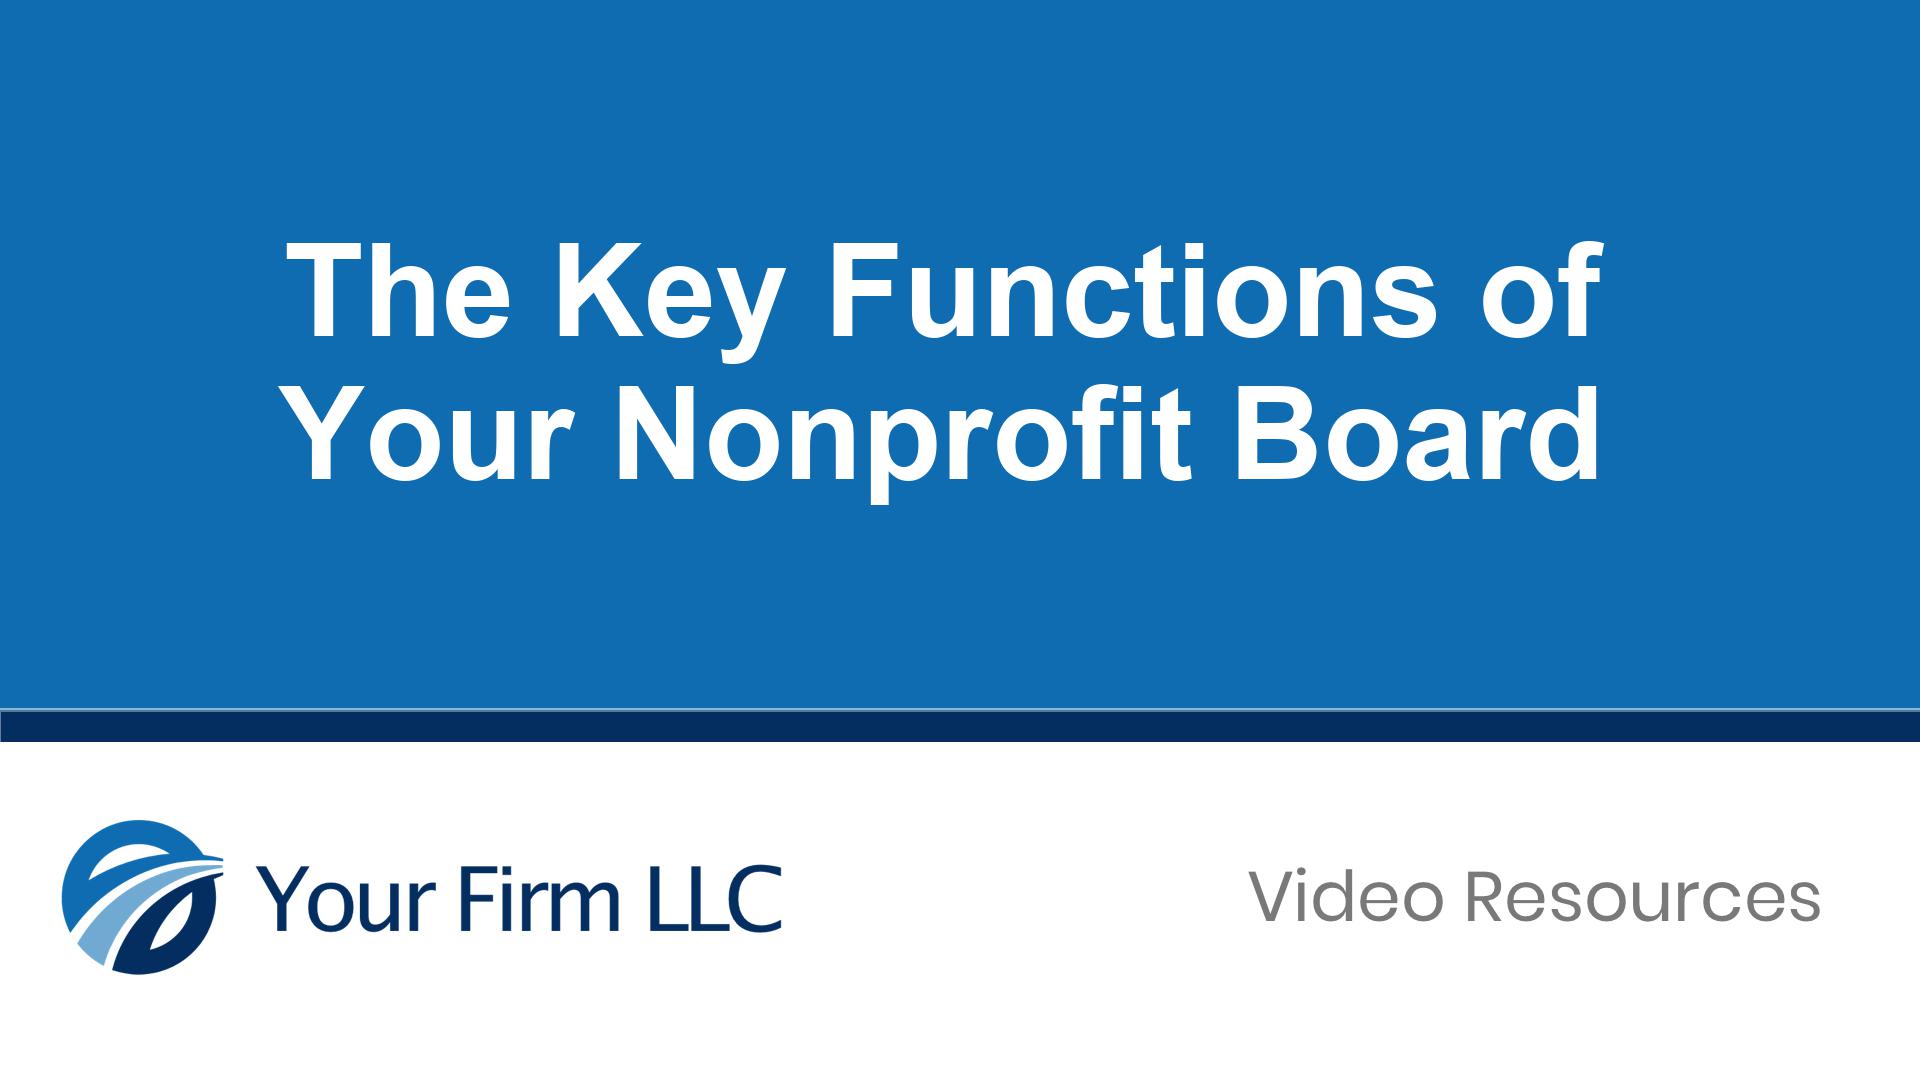 The Key Functions of Your Nonprofit Board